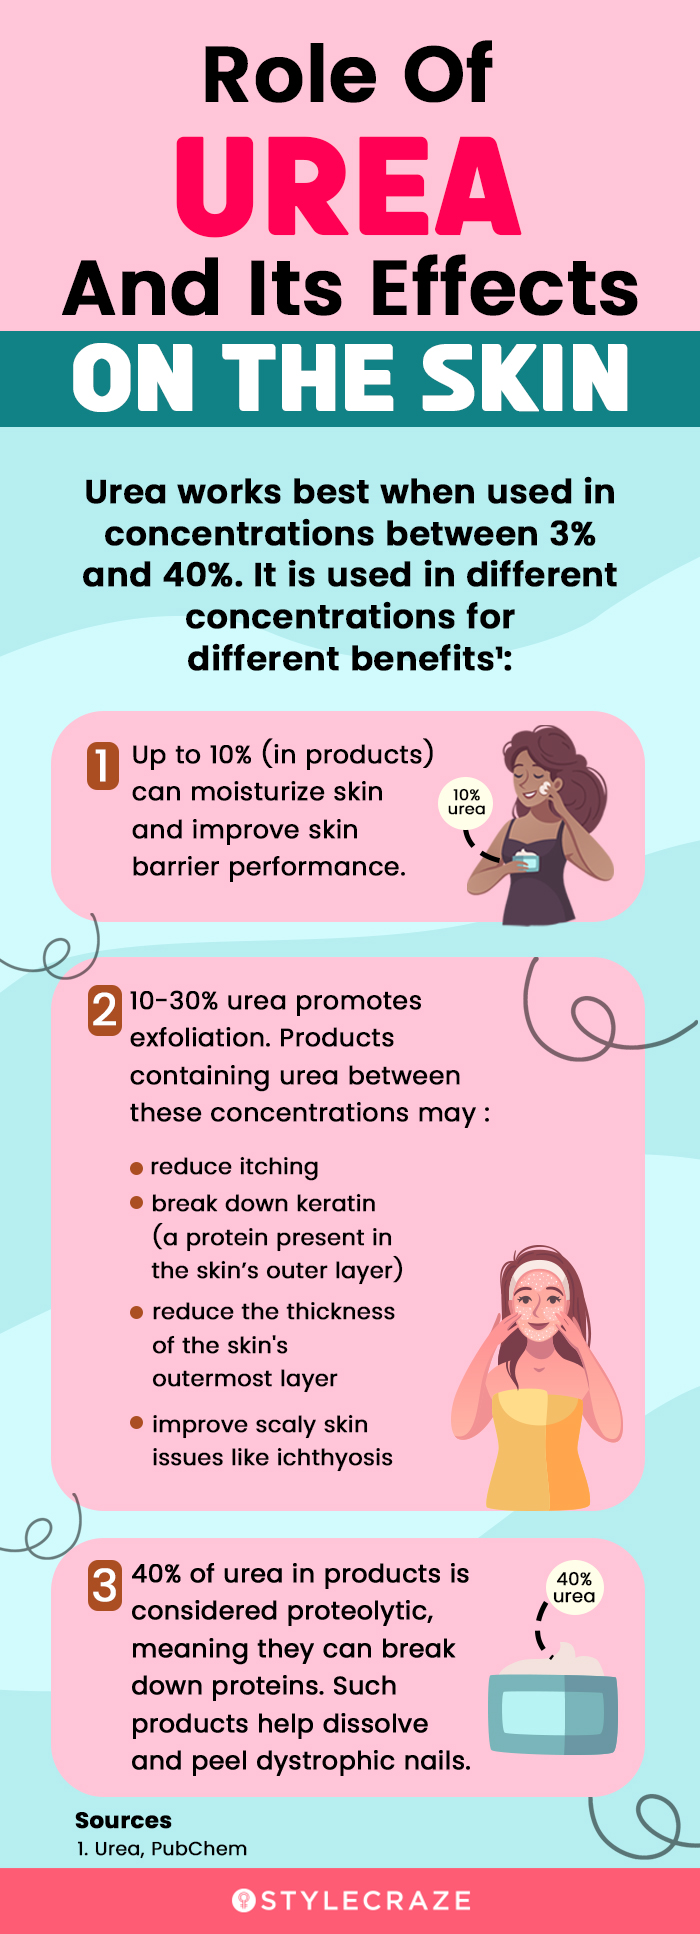 role of urea and its effects on the skin [infographic]